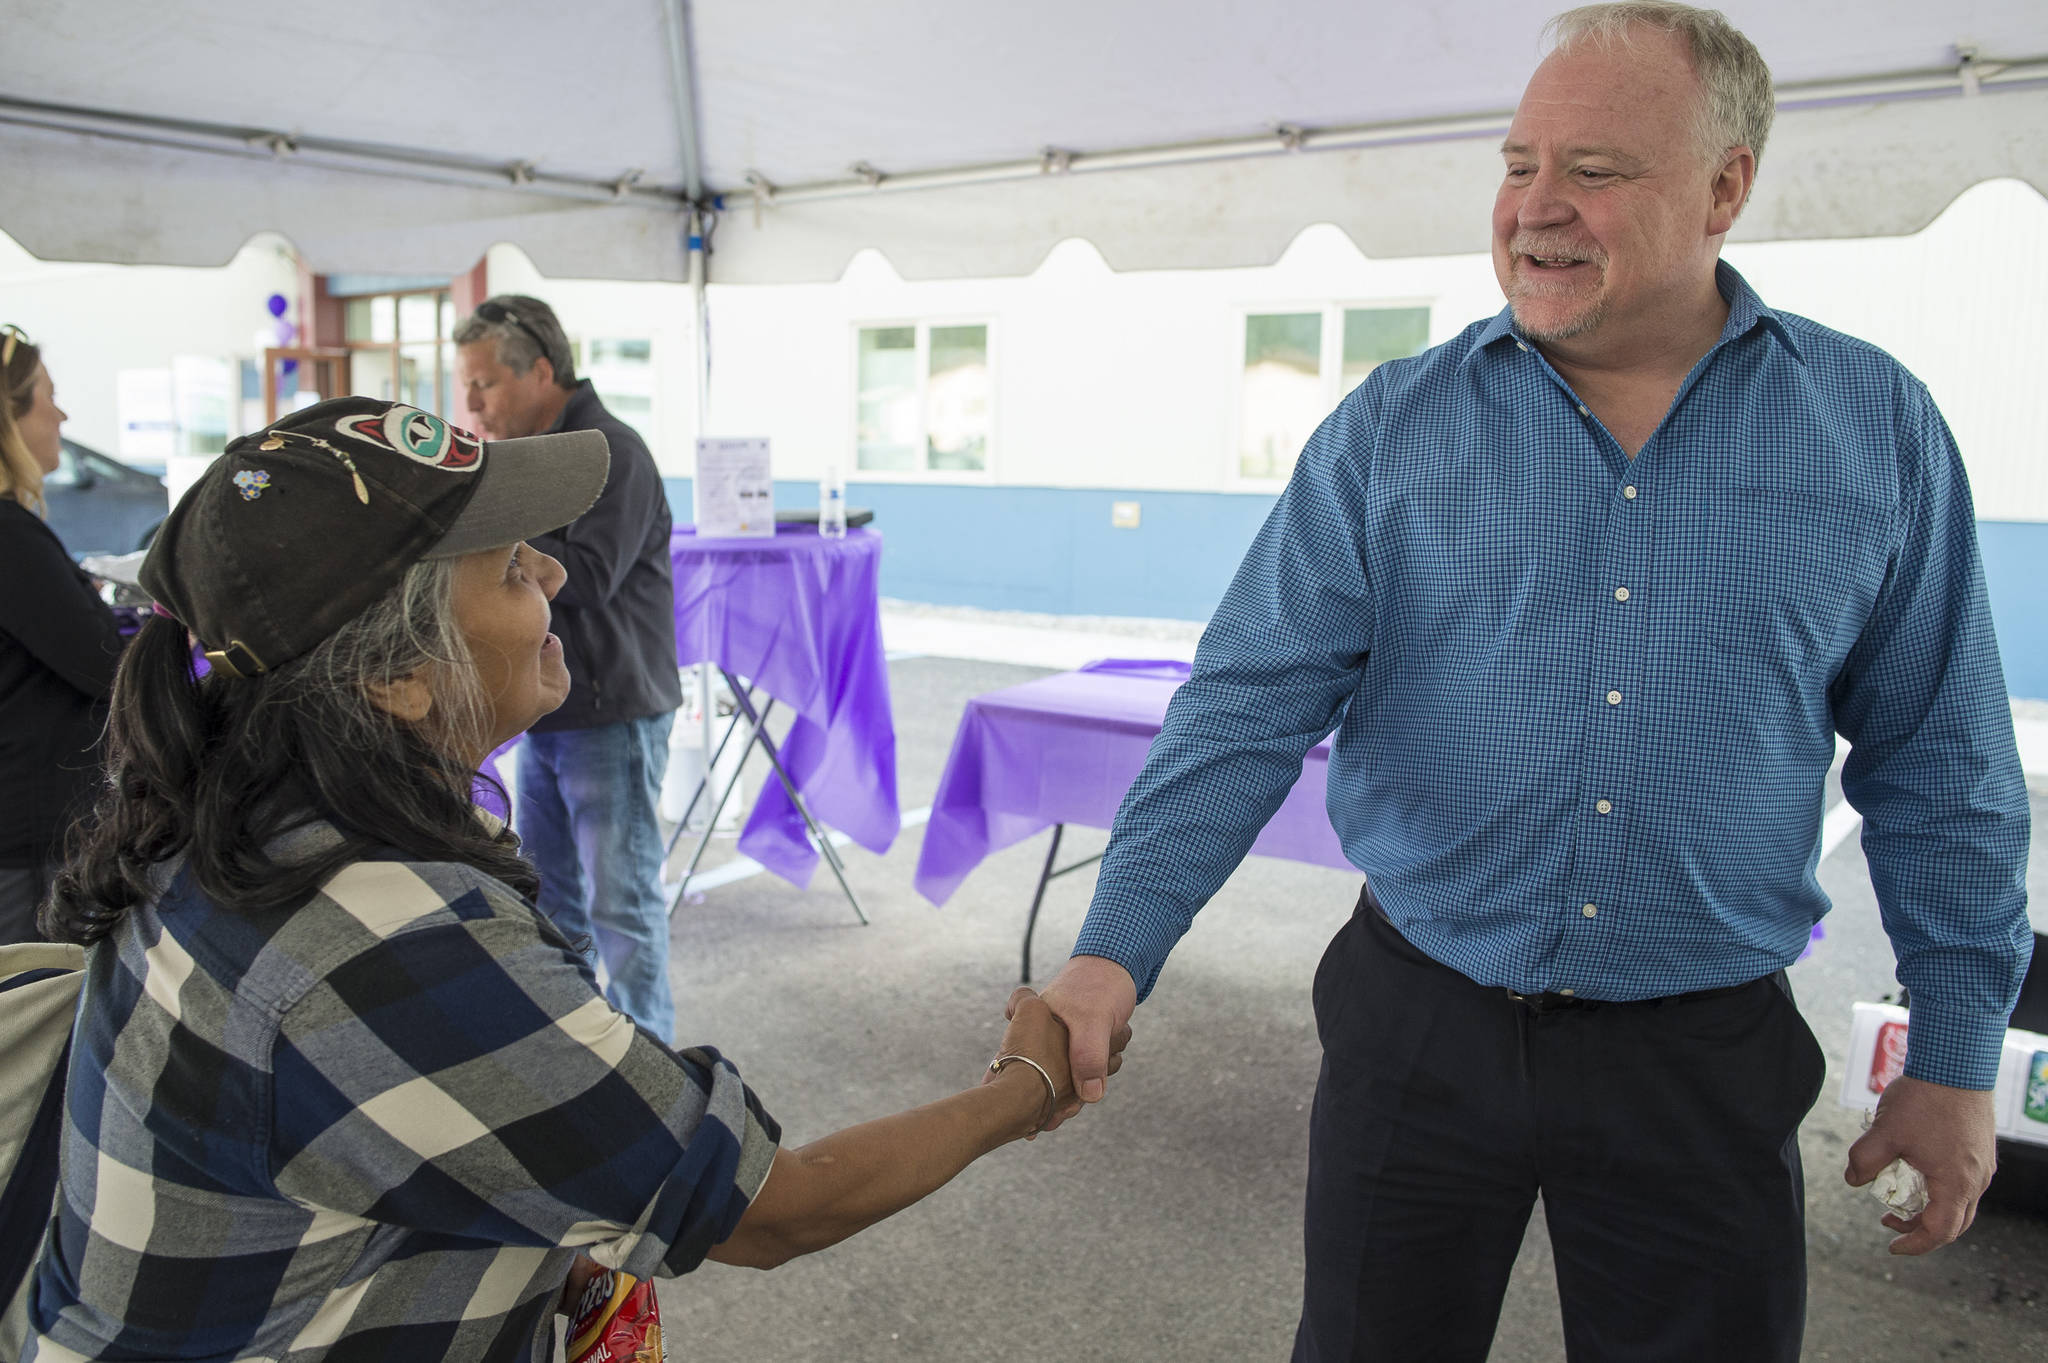 Dave Branding, CEO of JAMHI Health & Wellness, Inc., greets Angelina Lundy during an open house at JAMHI’s Midtown Clinic located at the House First Project on Friday, June 22, 2018. (Michael Penn | Juneau Empire)